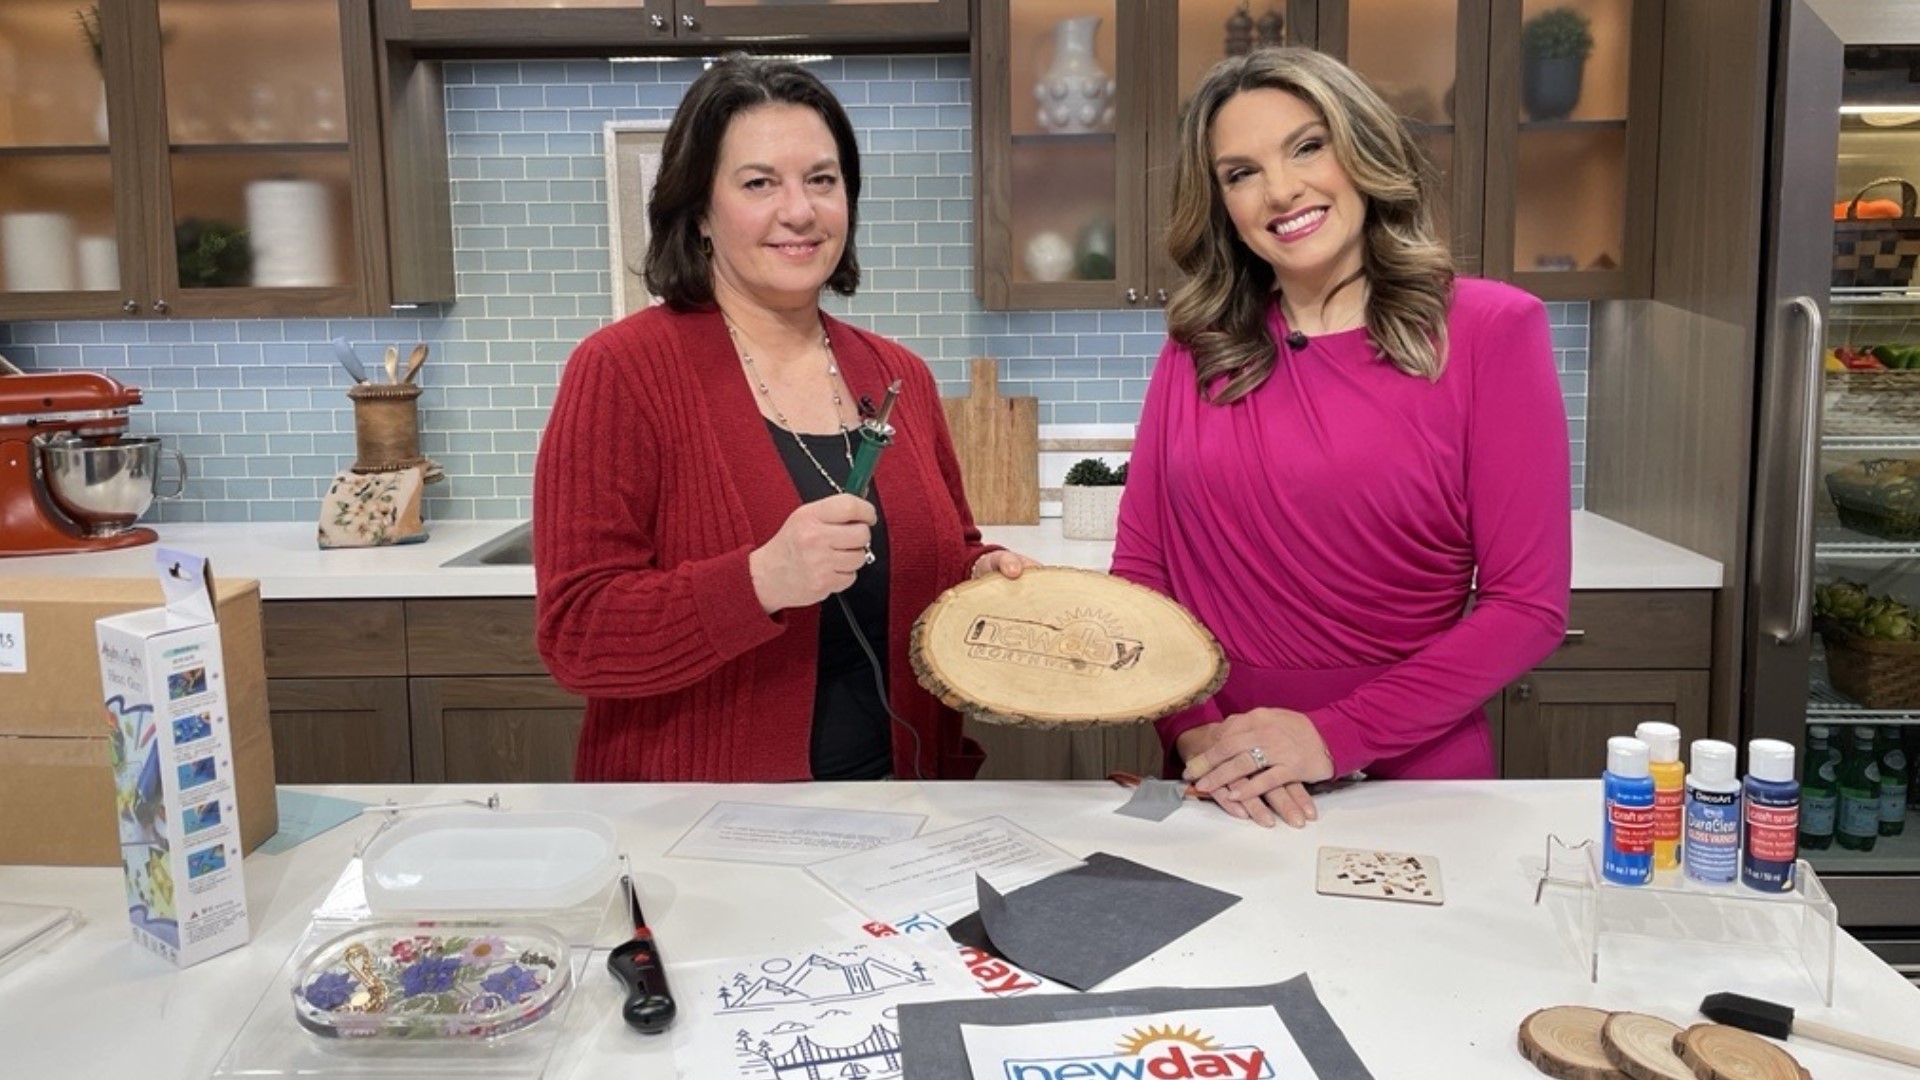 Adults & Crafts curate kits with everything you need for a fun date night or just a quiet night in. Learn more at their website adultsandcrafts.com. #newdaynw